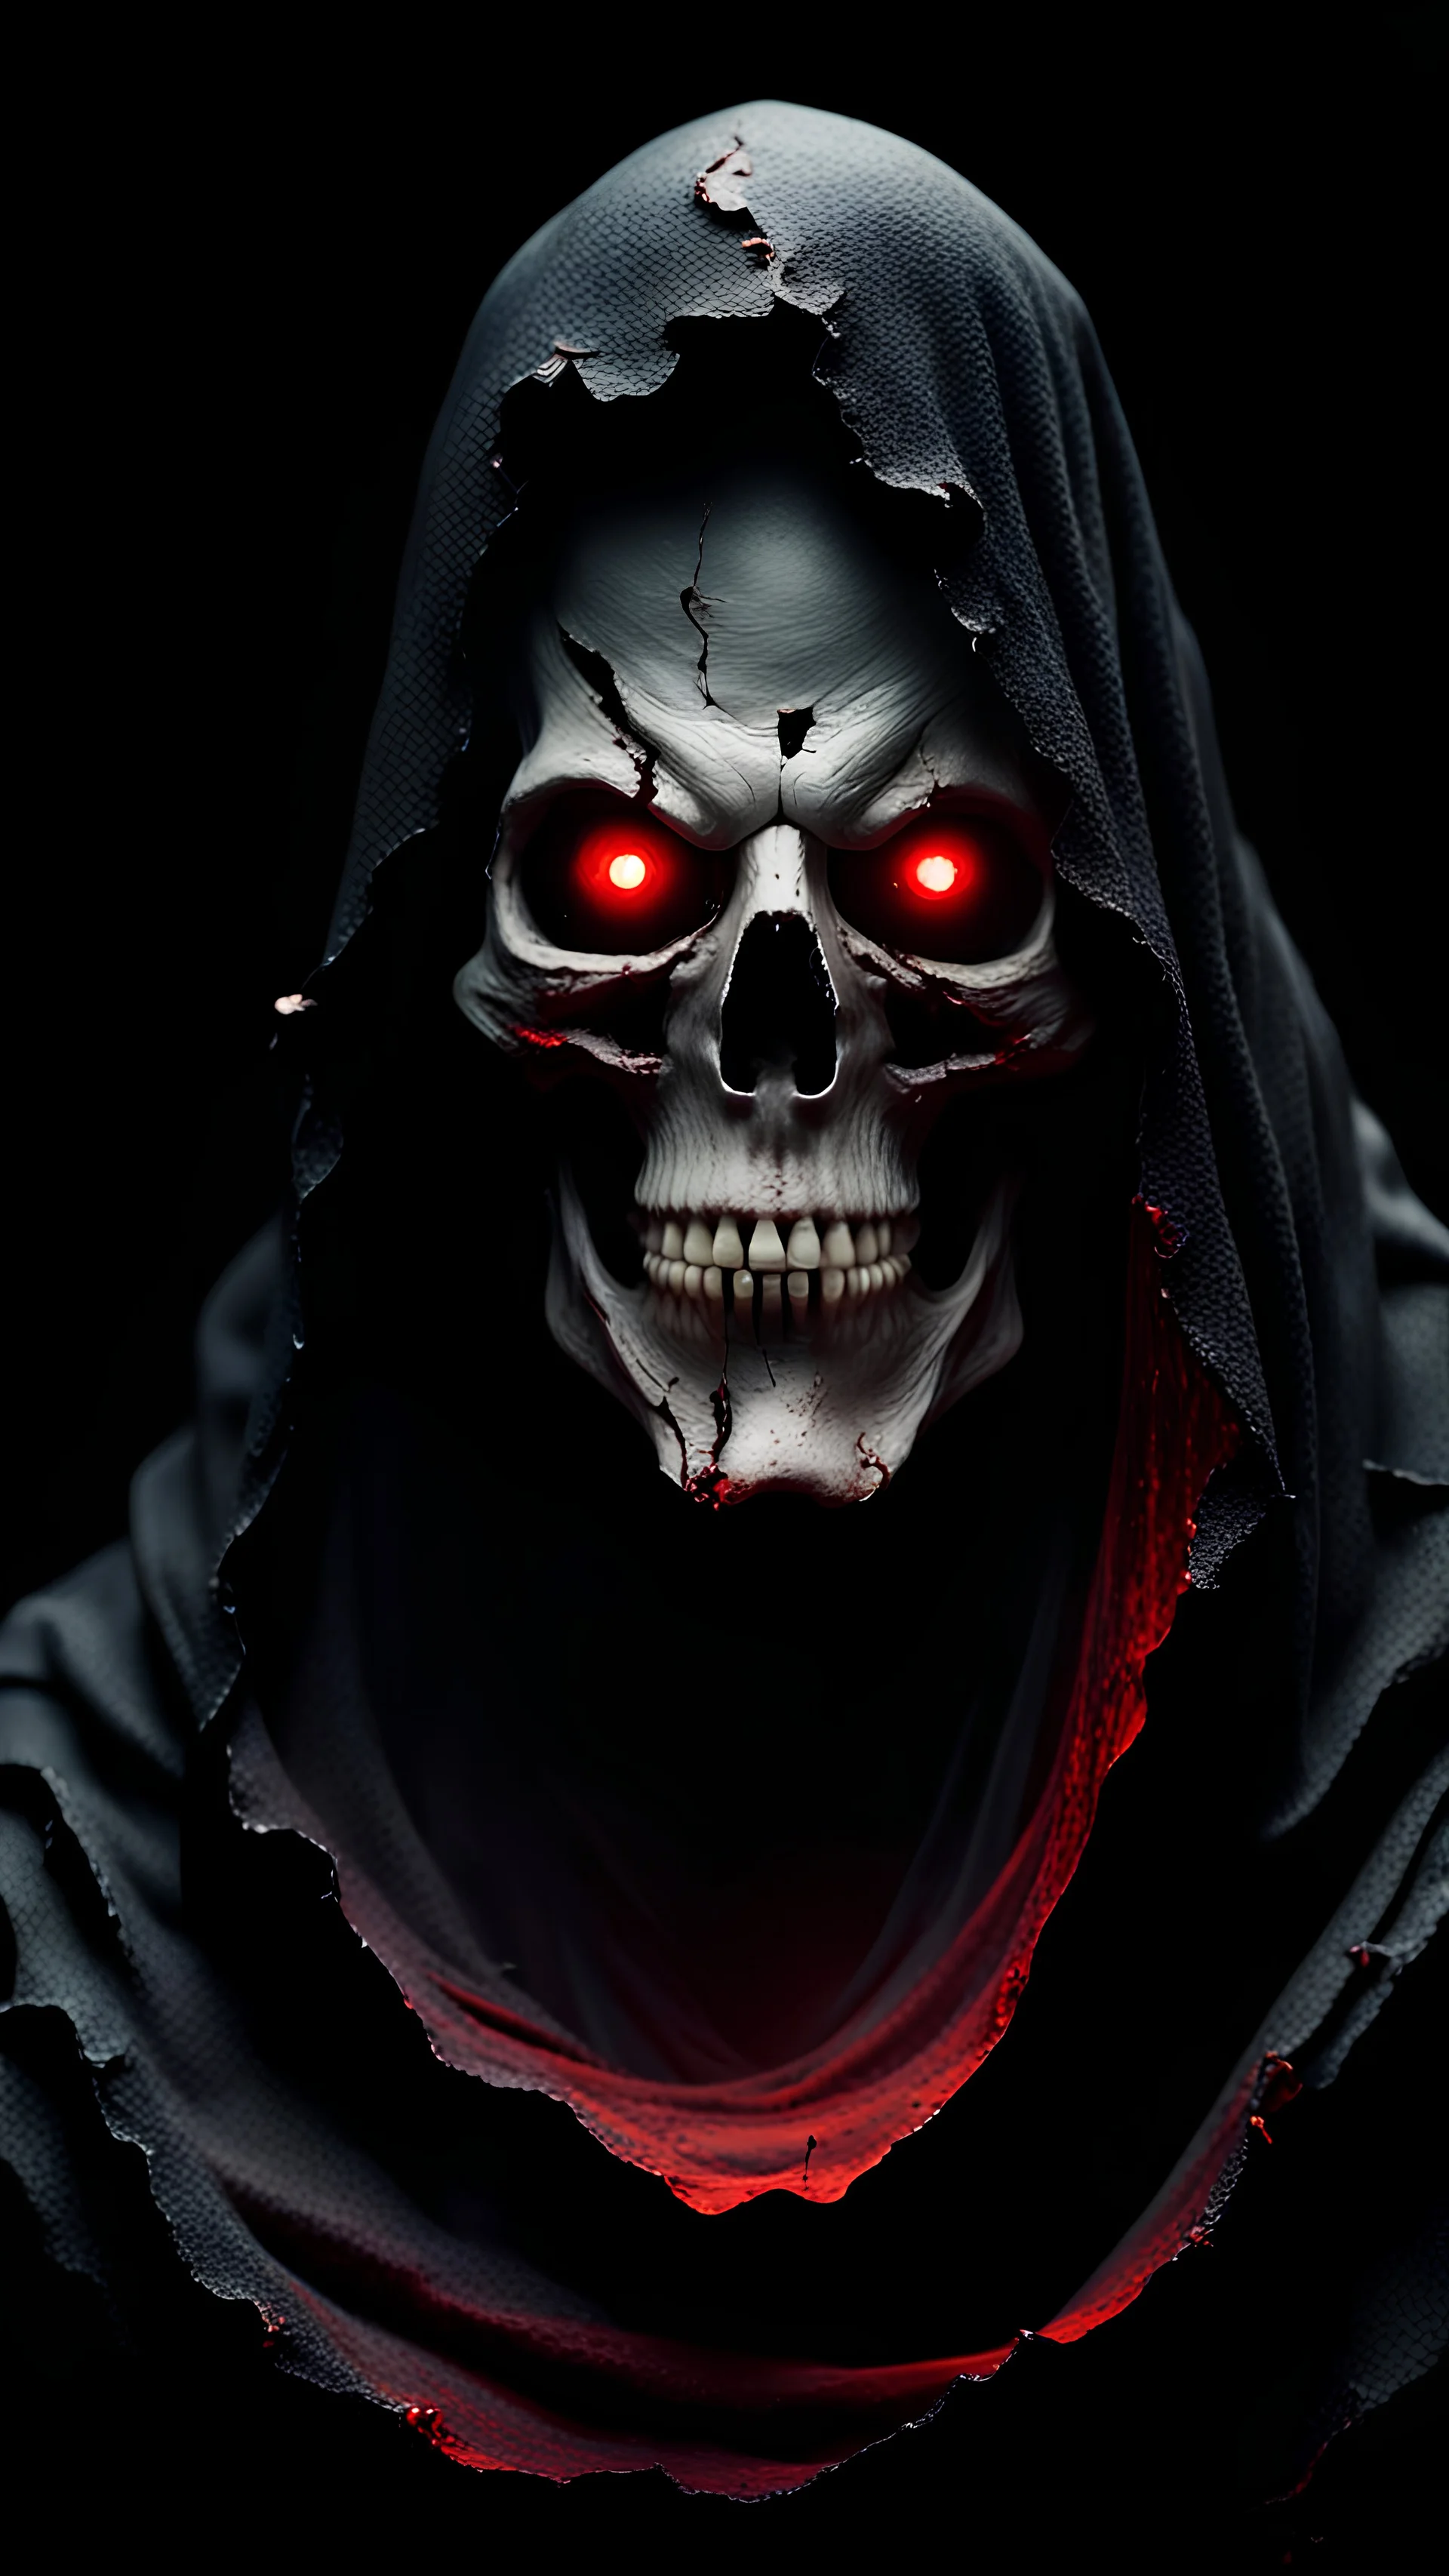 Horror cinematic ominous scary huge figure in a black torn mantle fluttering in the wind. The figure's face looks like a old skull. red burned eyes look straight into the soul. Black background.